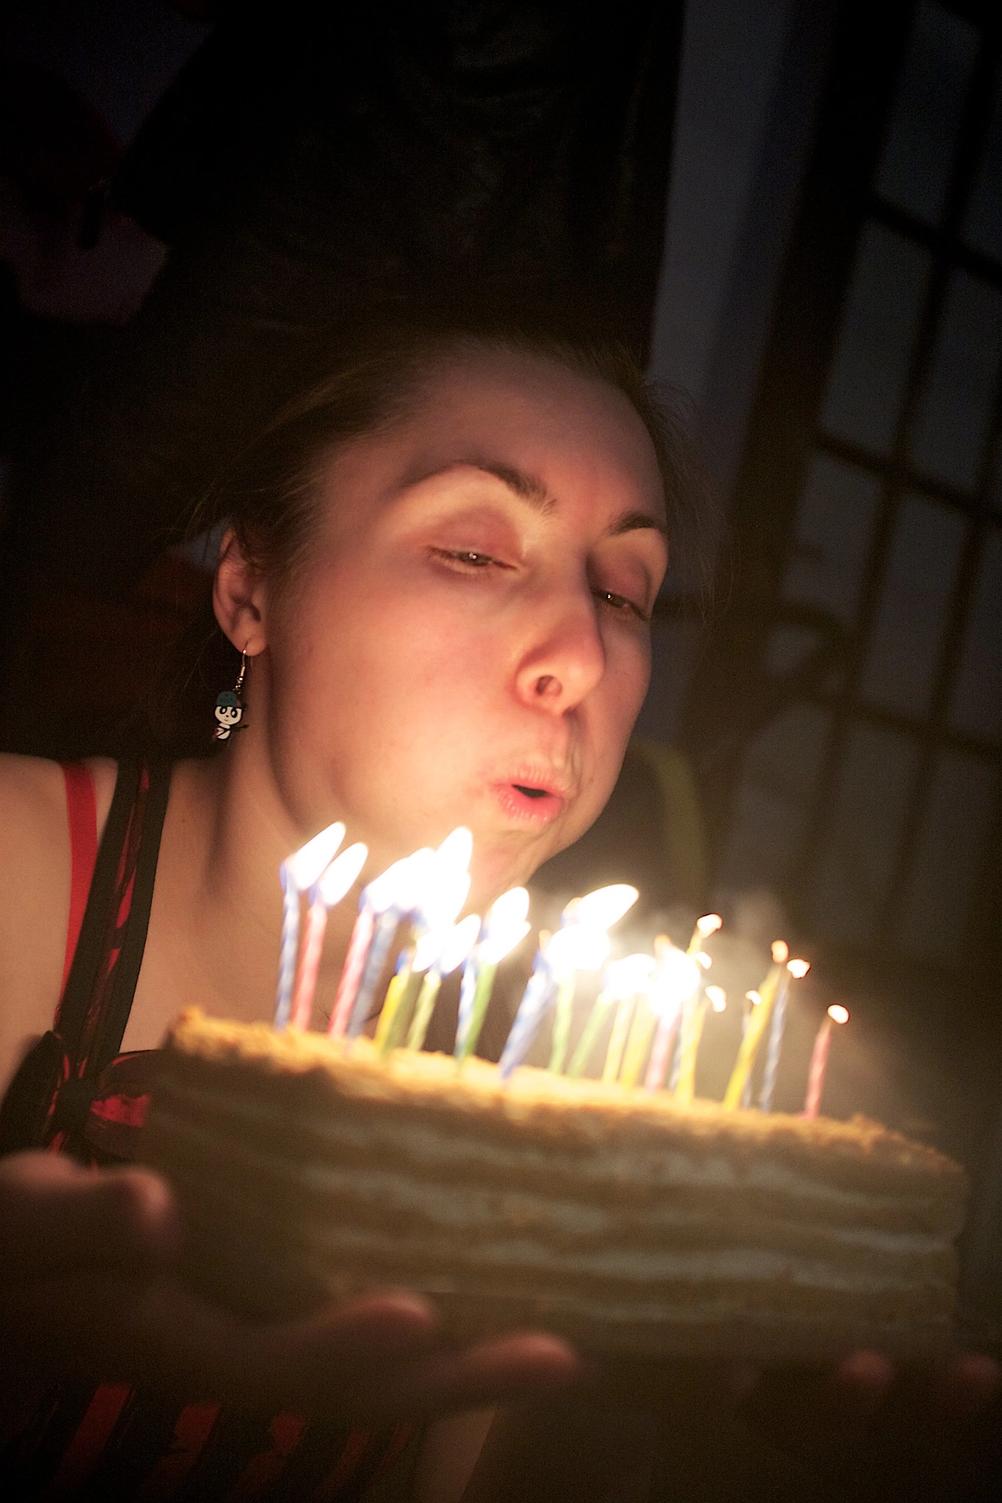 Photo of my wife blowing candles.